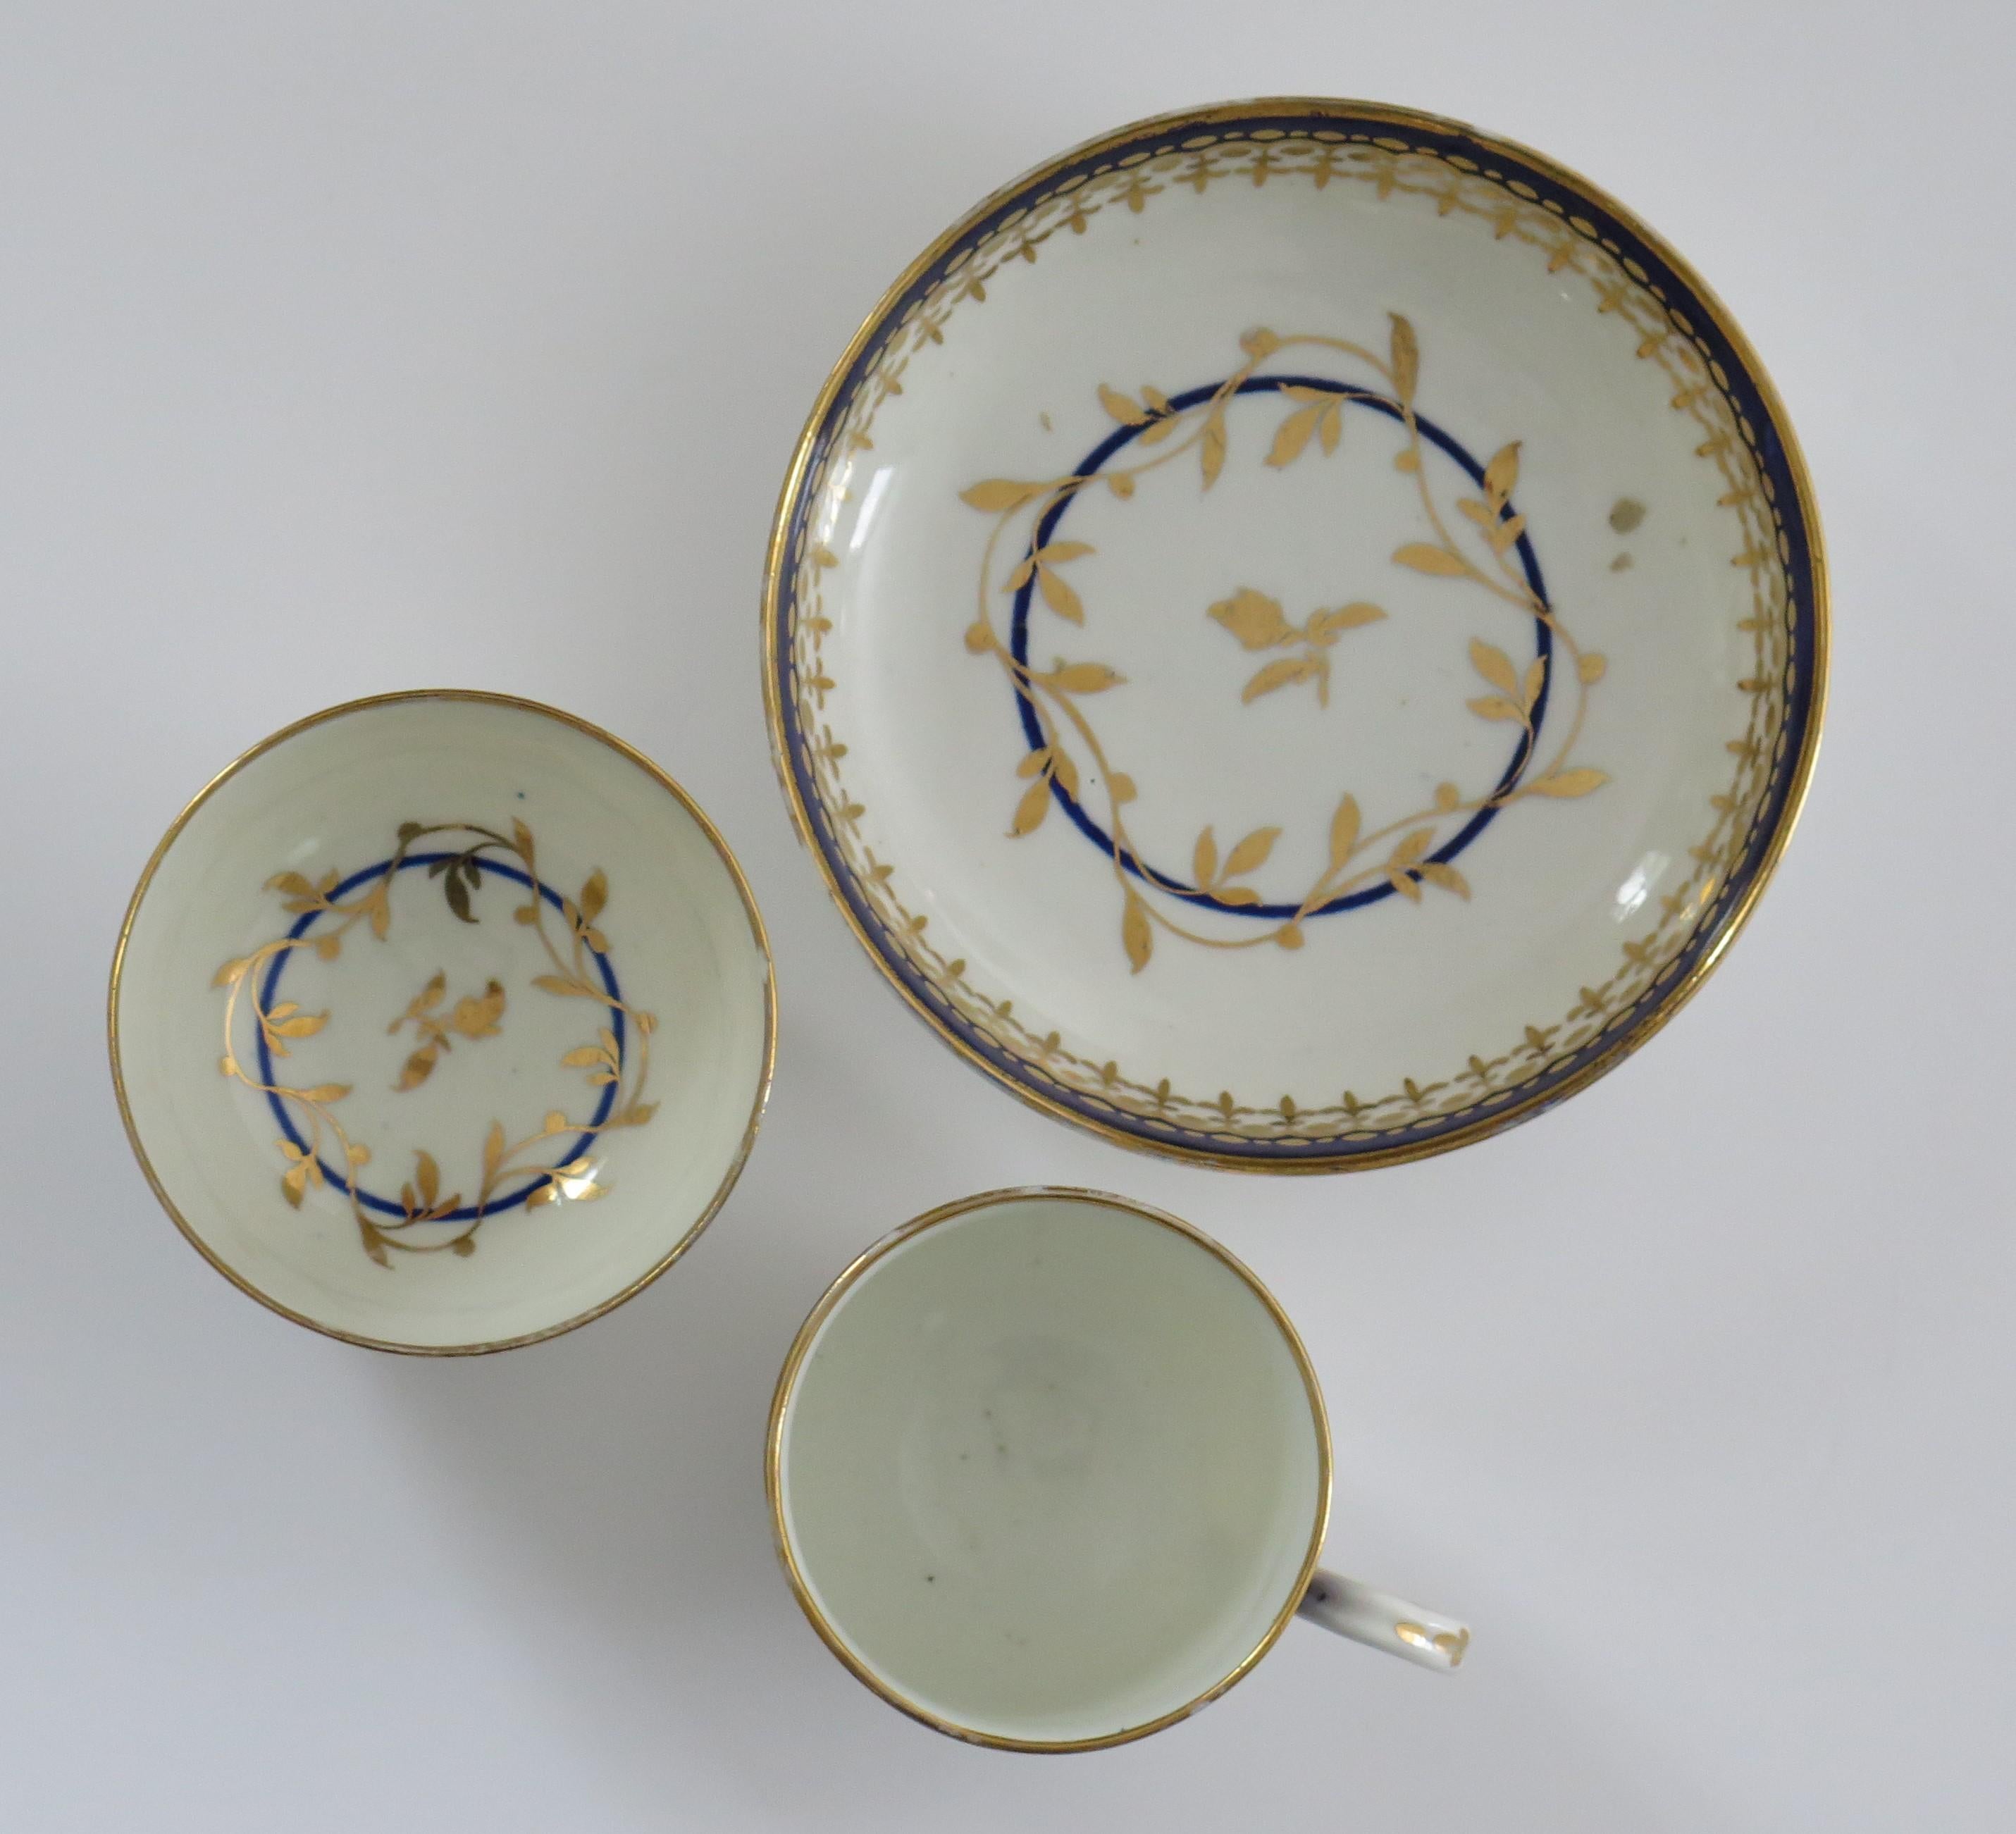 This is a good late 18th century Worcester porcelain TRIO of Coffee Cup, Tea Bowl and Saucer in a combined blue and gold pattern, fully marked and dating to circa 1780.

All pieces are decorated in a classical pattern of underglaze blue with hand